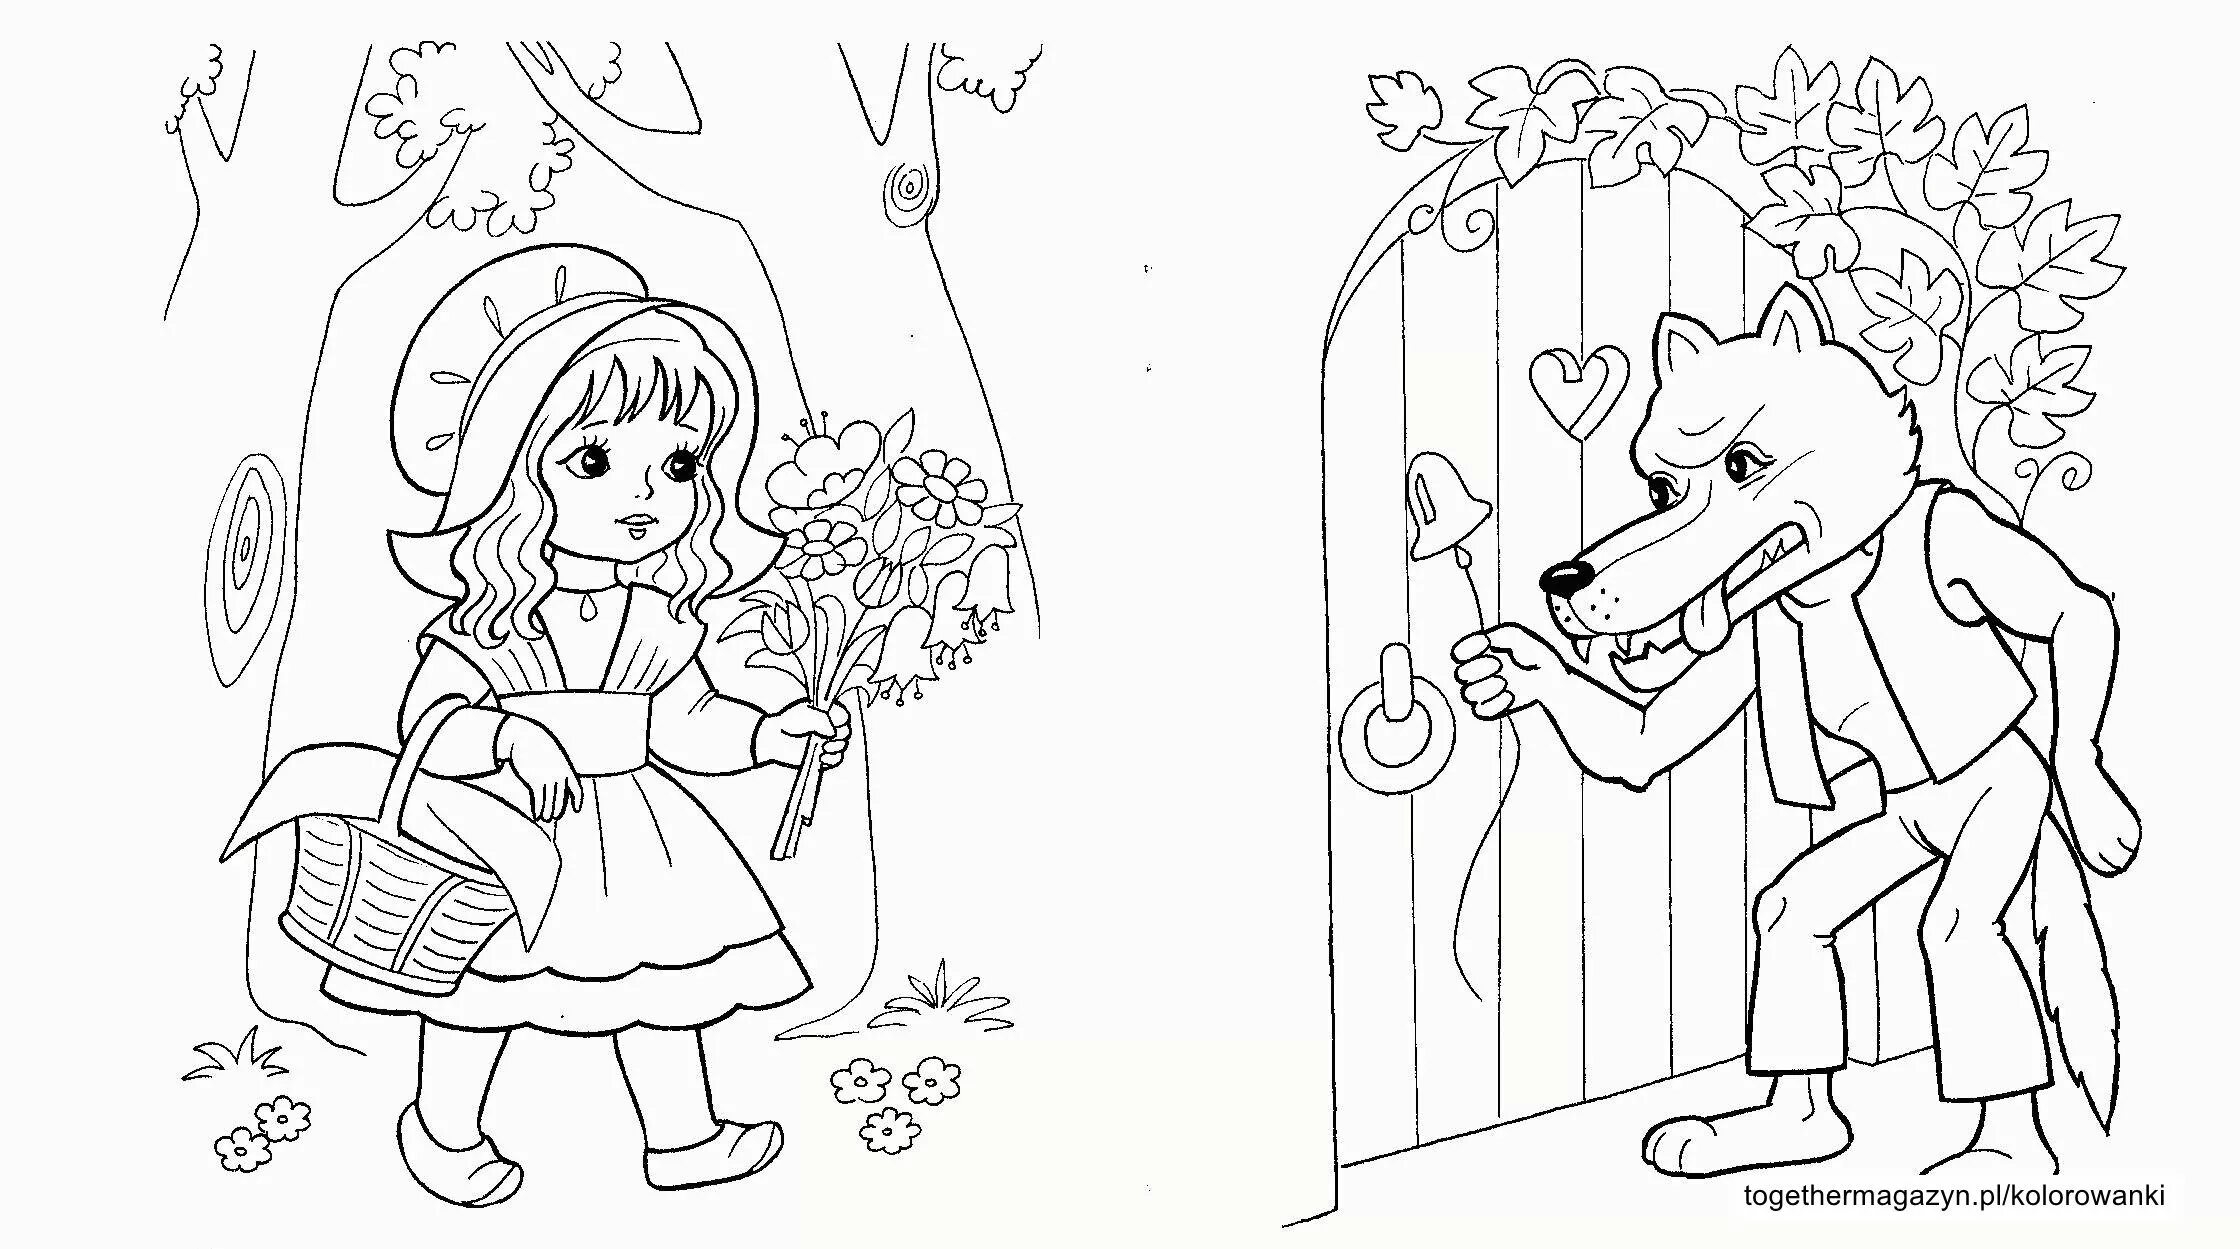 Witty gray wolf and Little Red Riding Hood coloring book